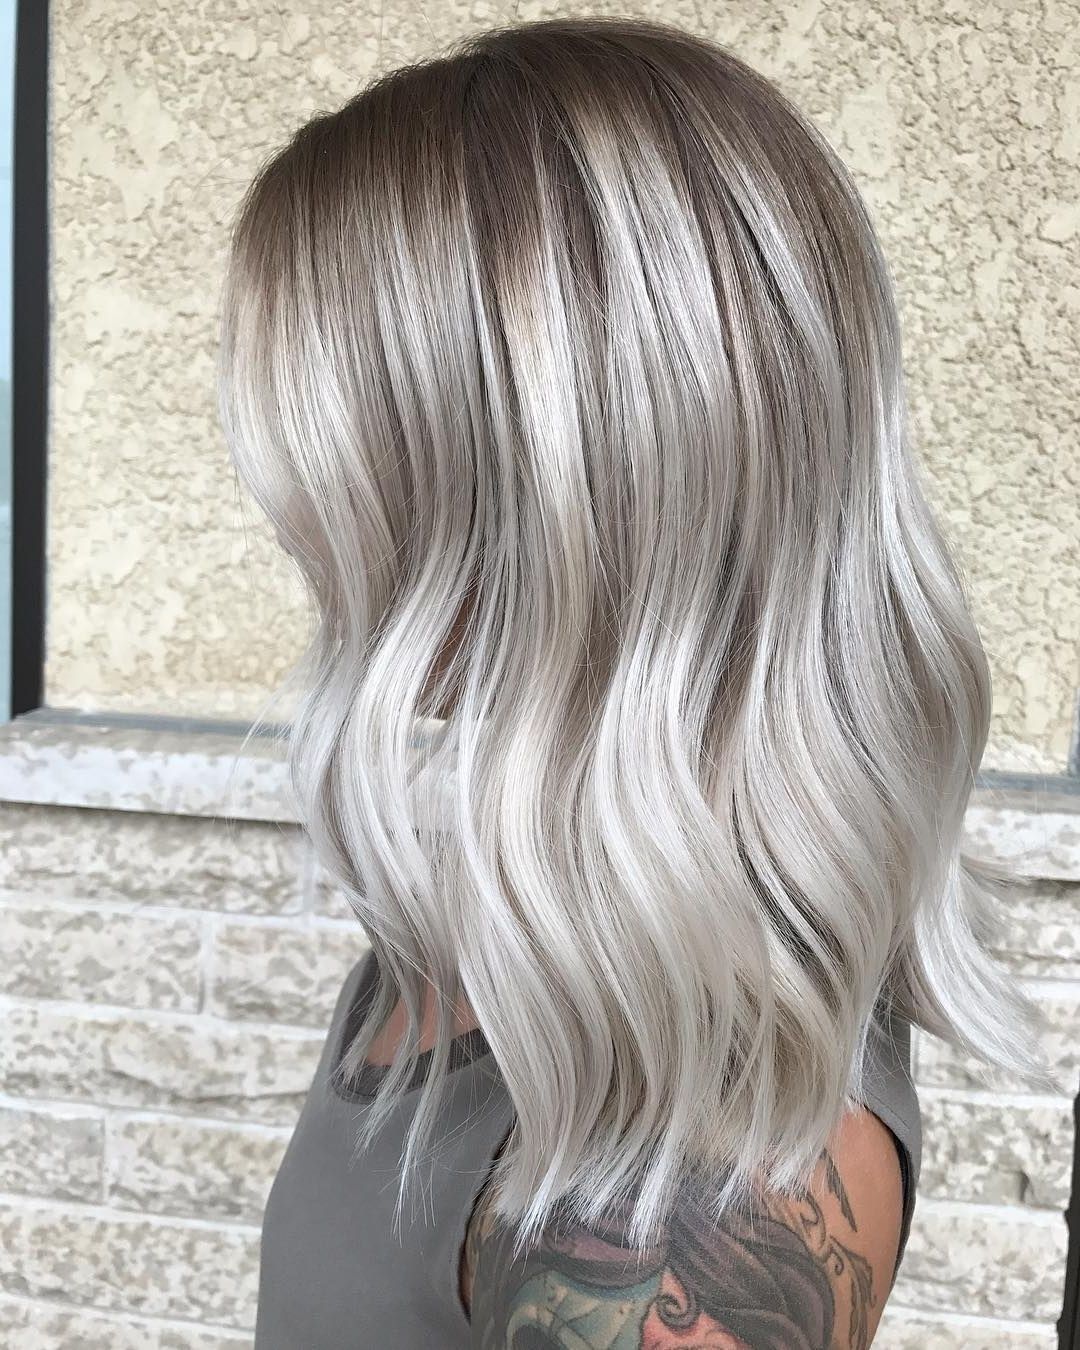 10 Ash Blonde Hairstyles For All Skin Tones, 2018 Best Hair Color Trends Inside Recent Fade To White Blonde Hairstyles (View 4 of 20)